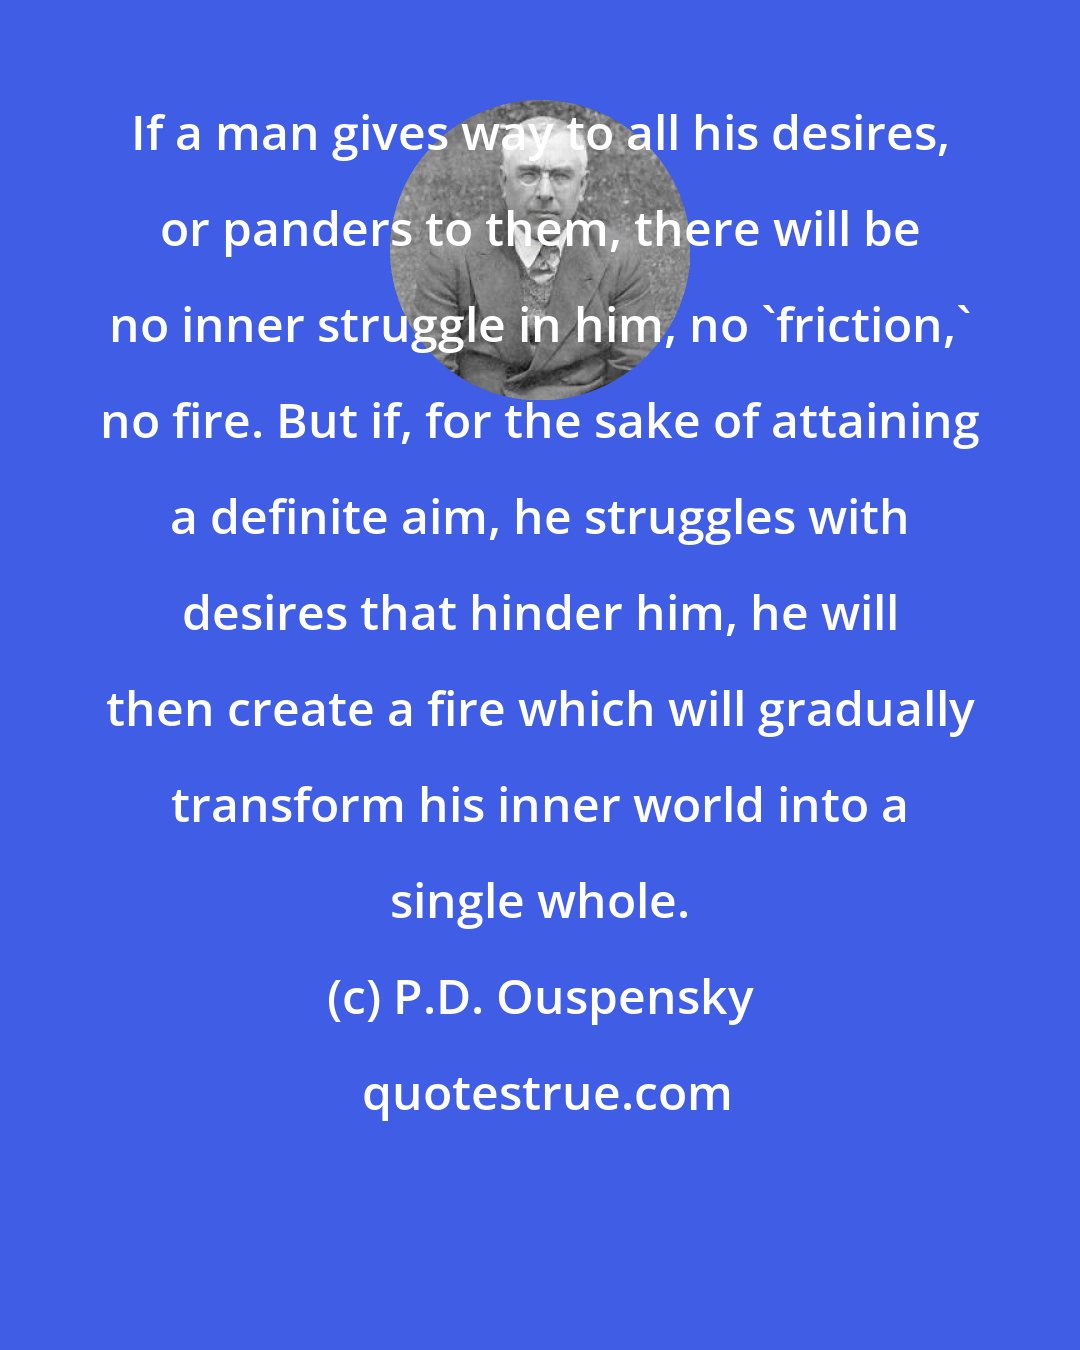 P.D. Ouspensky: If a man gives way to all his desires, or panders to them, there will be no inner struggle in him, no 'friction,' no fire. But if, for the sake of attaining a definite aim, he struggles with desires that hinder him, he will then create a fire which will gradually transform his inner world into a single whole.